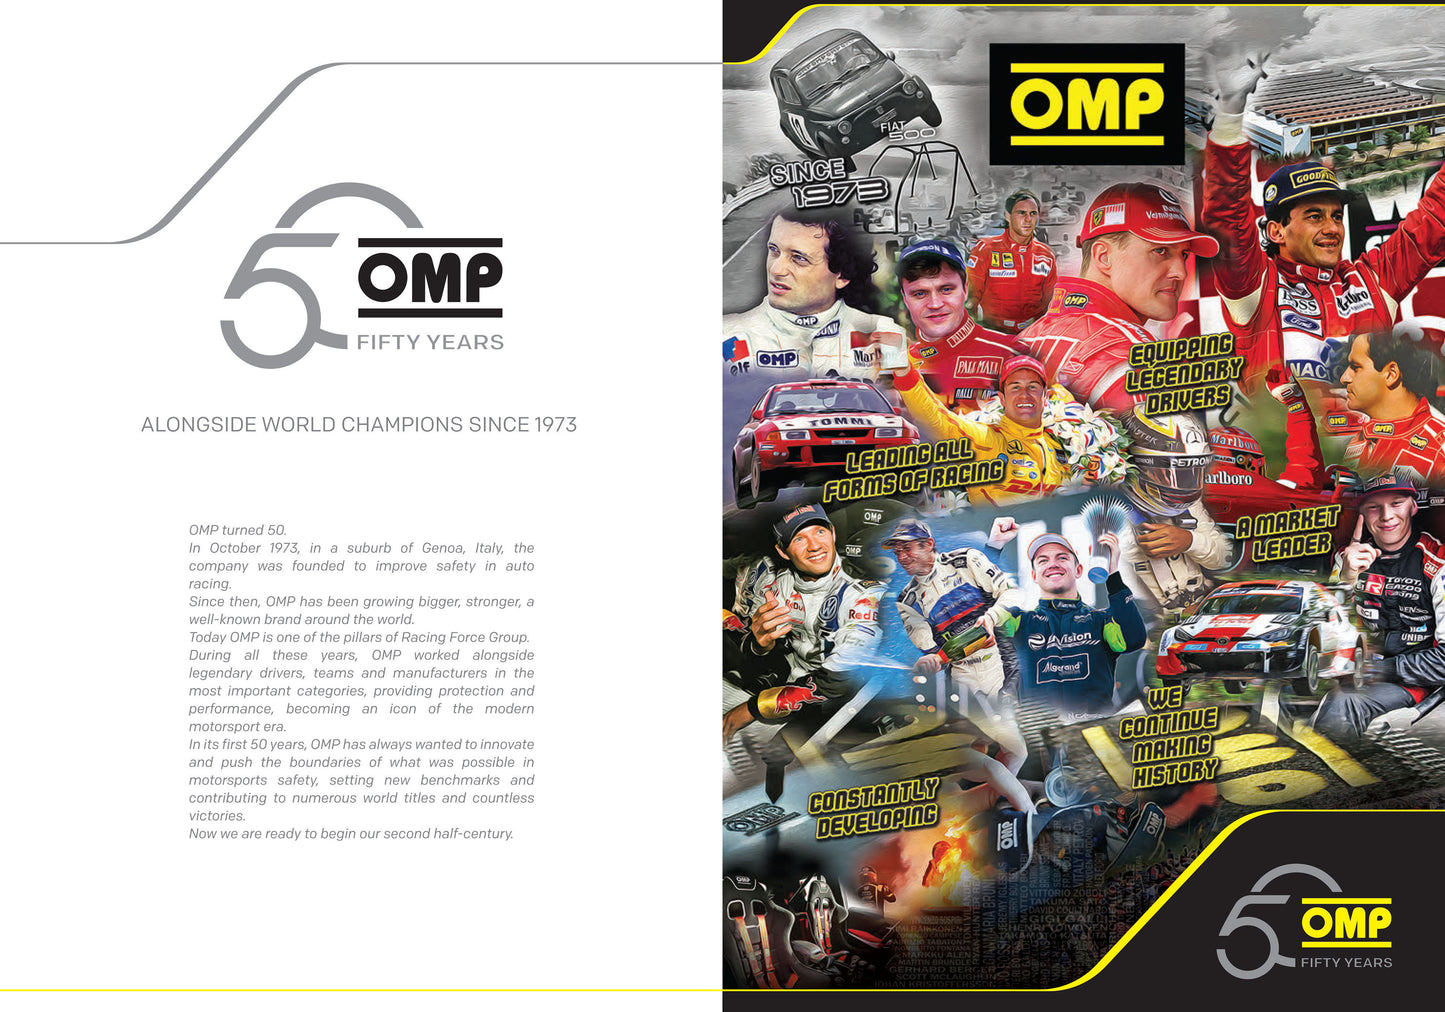 OMP Mens Fireproof Boxer Shorts Race Rally Motorsport FIA 8856-2018 Approved